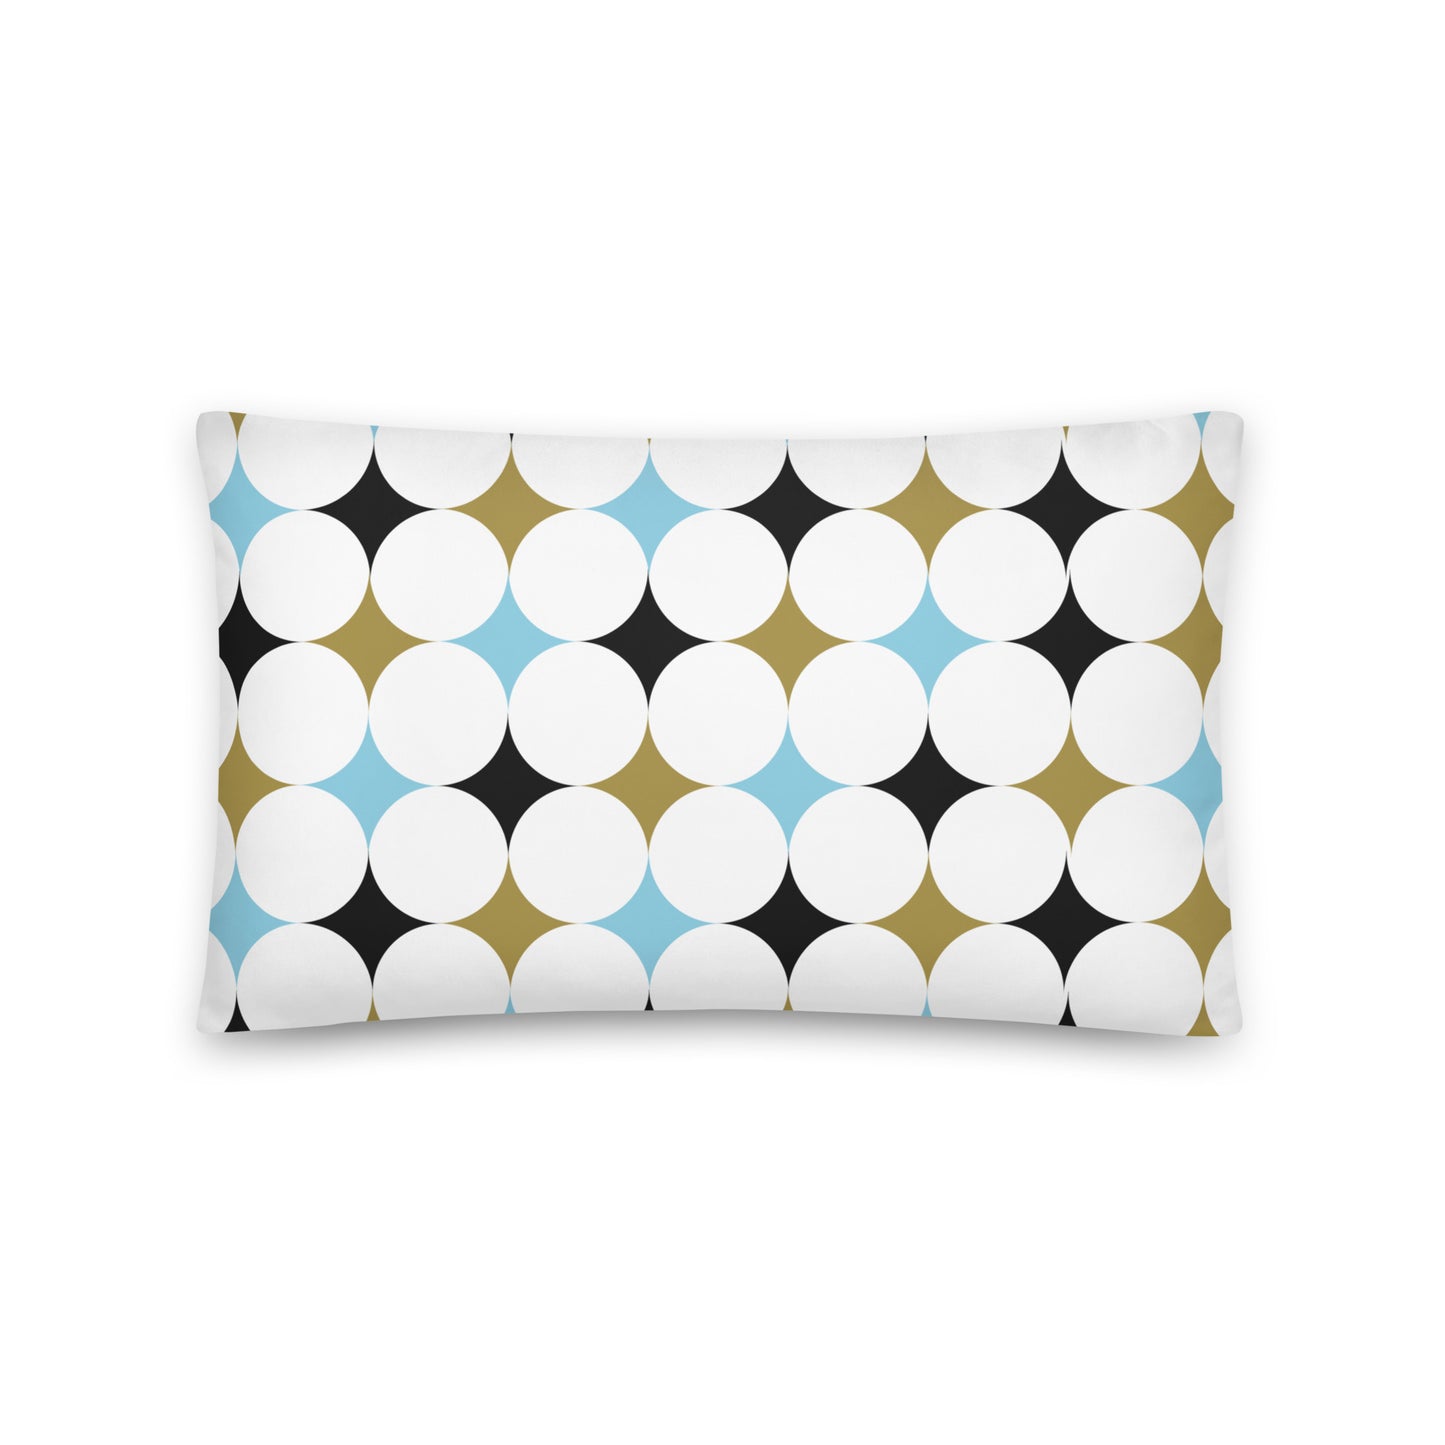 Retro Rounded Pattern - Sustainably Made Pillows